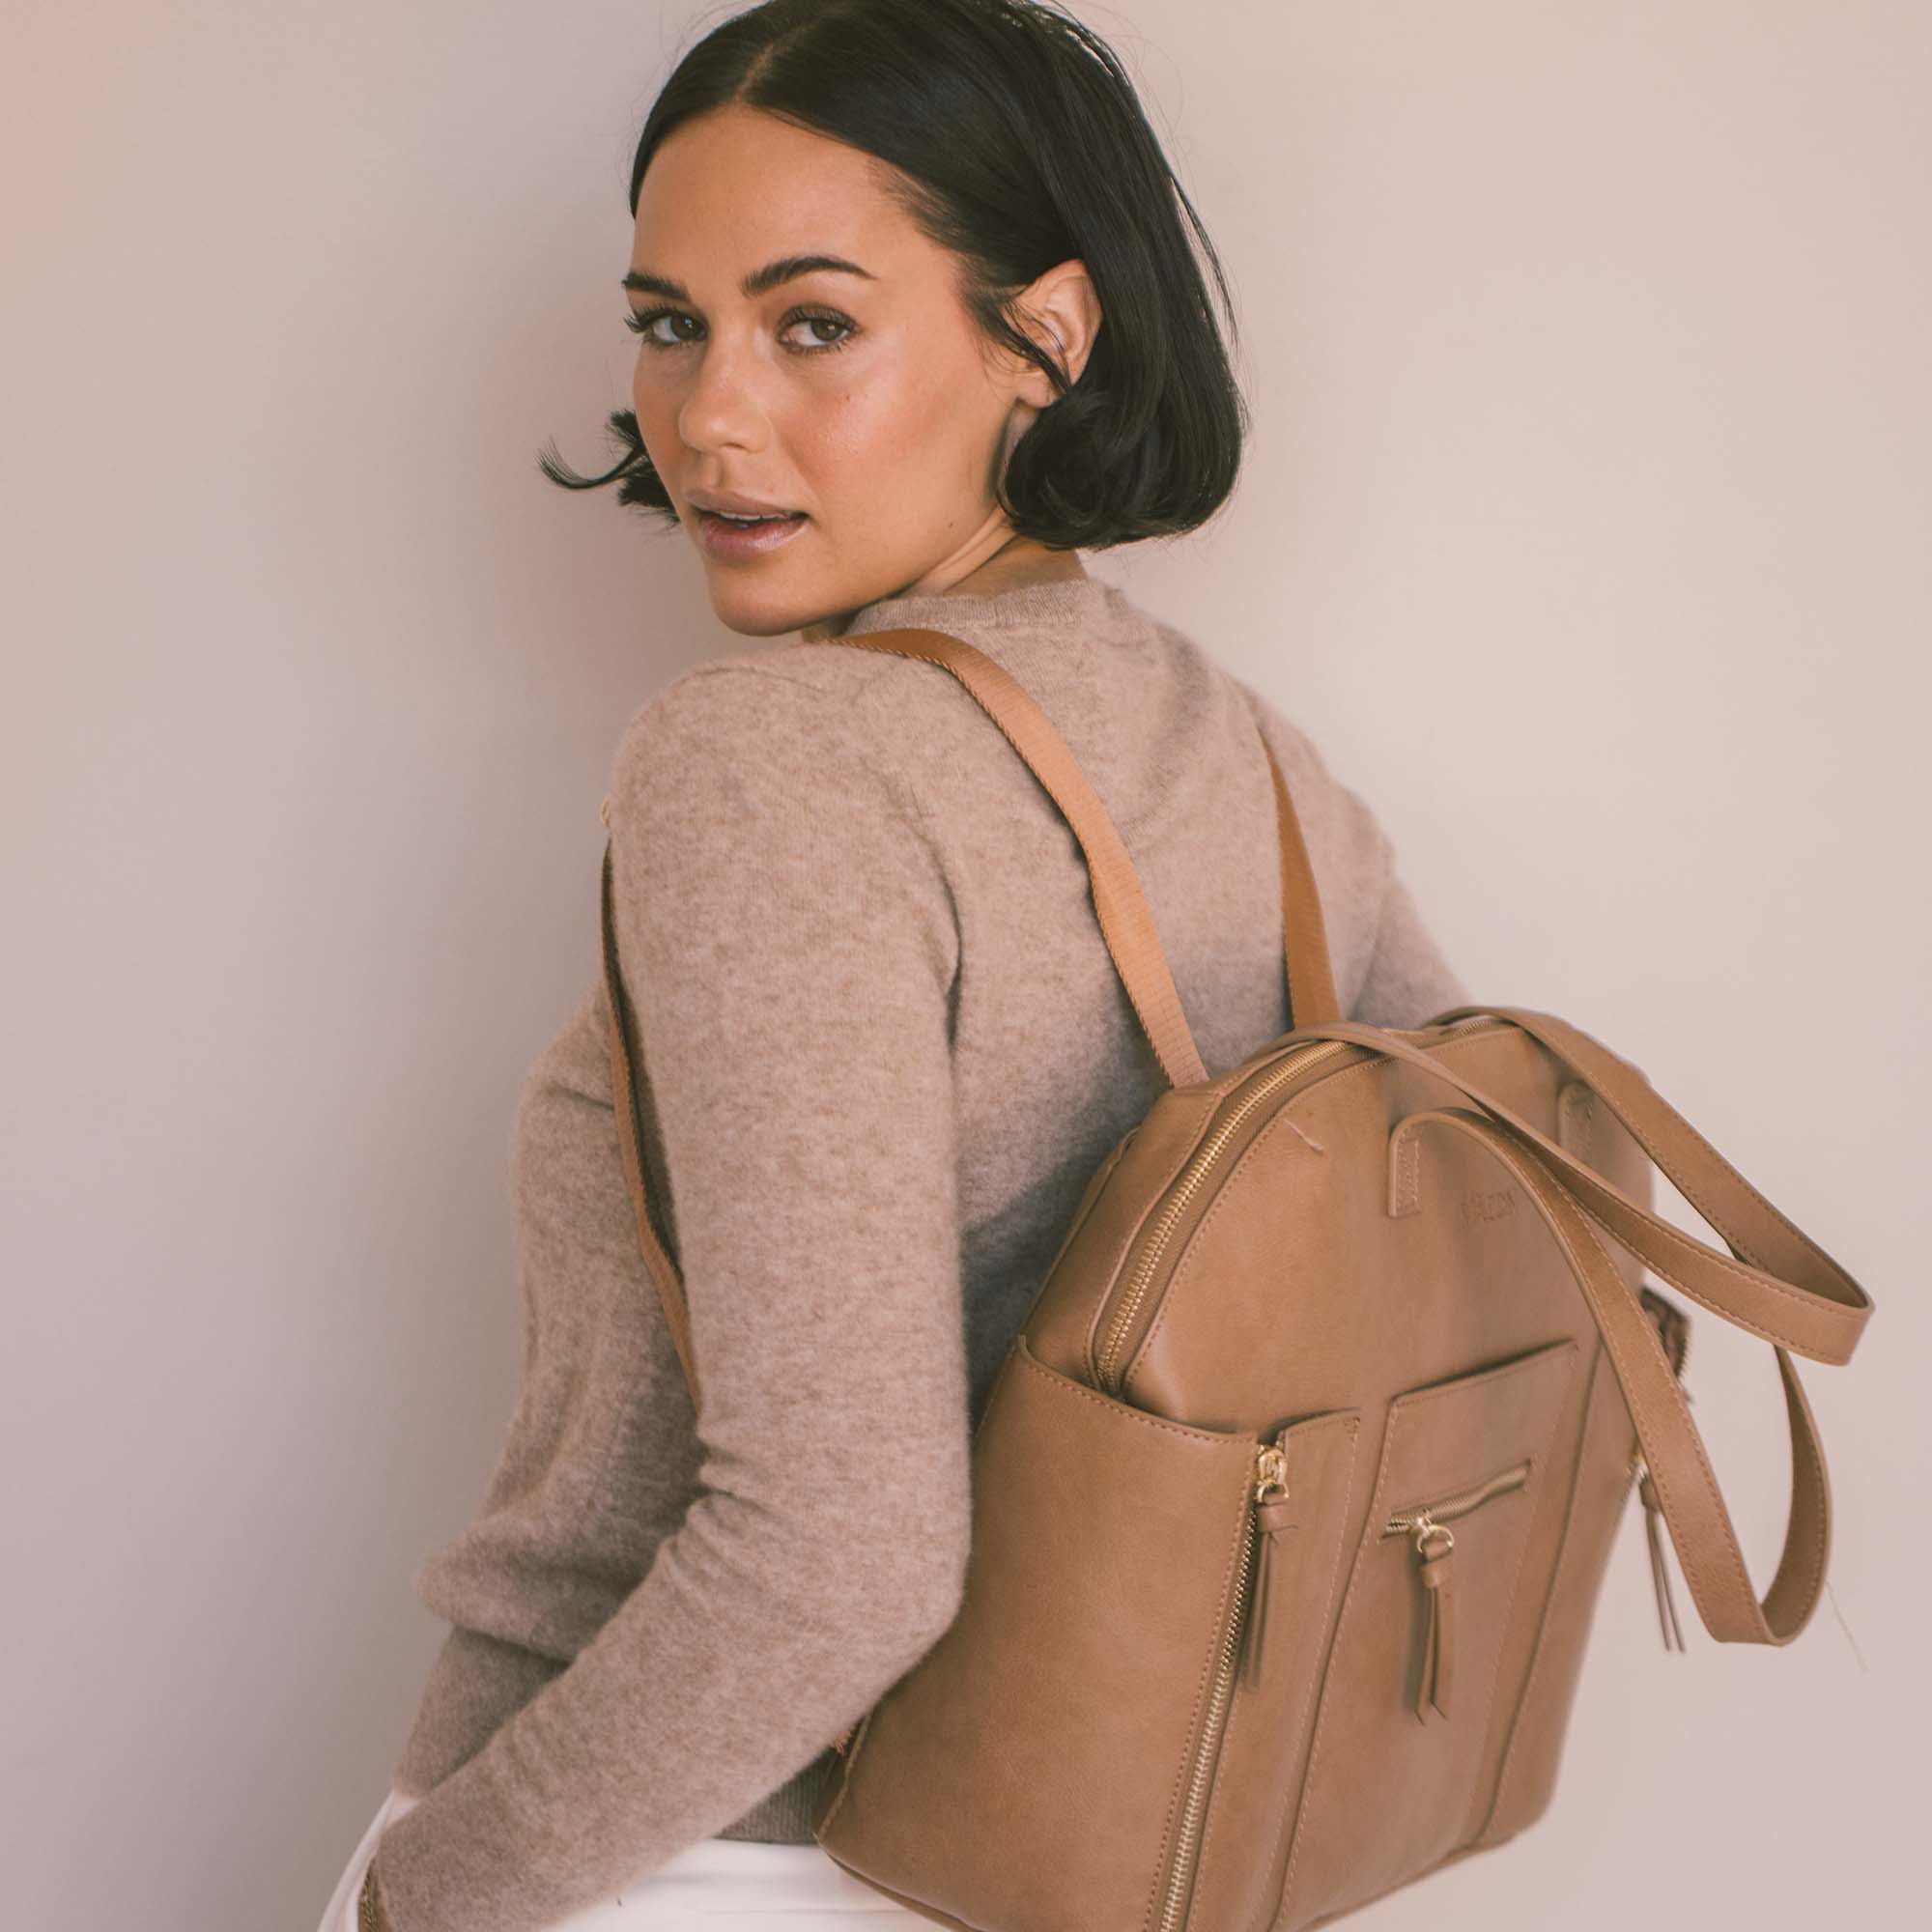 Camel Carryall Convertible Tote - Māedn